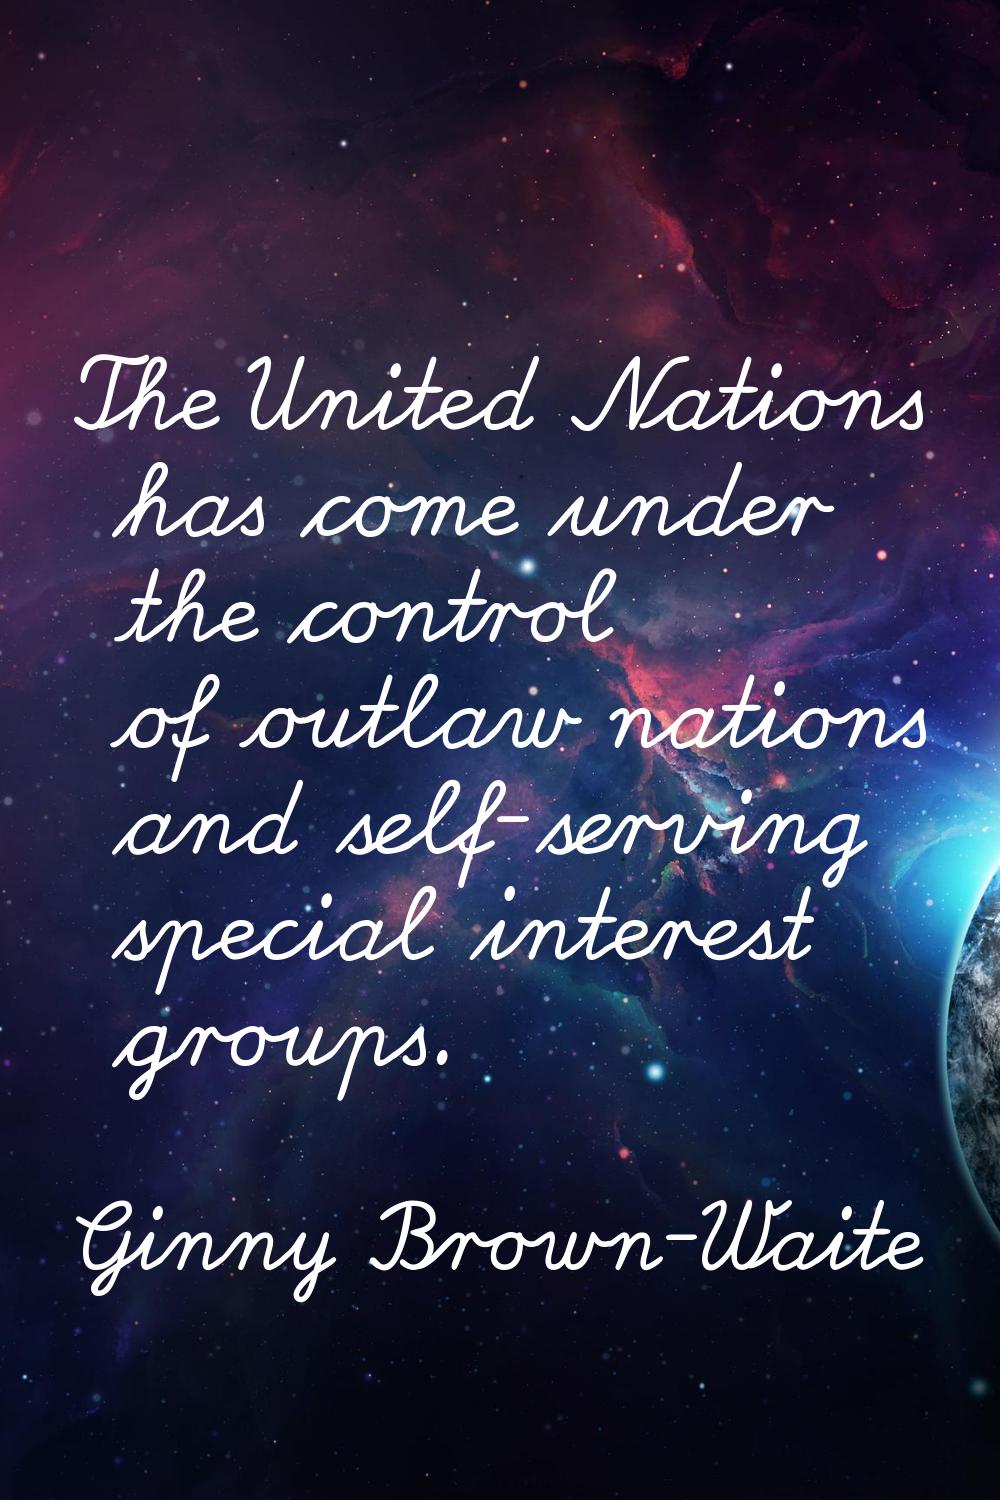 The United Nations has come under the control of outlaw nations and self-serving special interest g